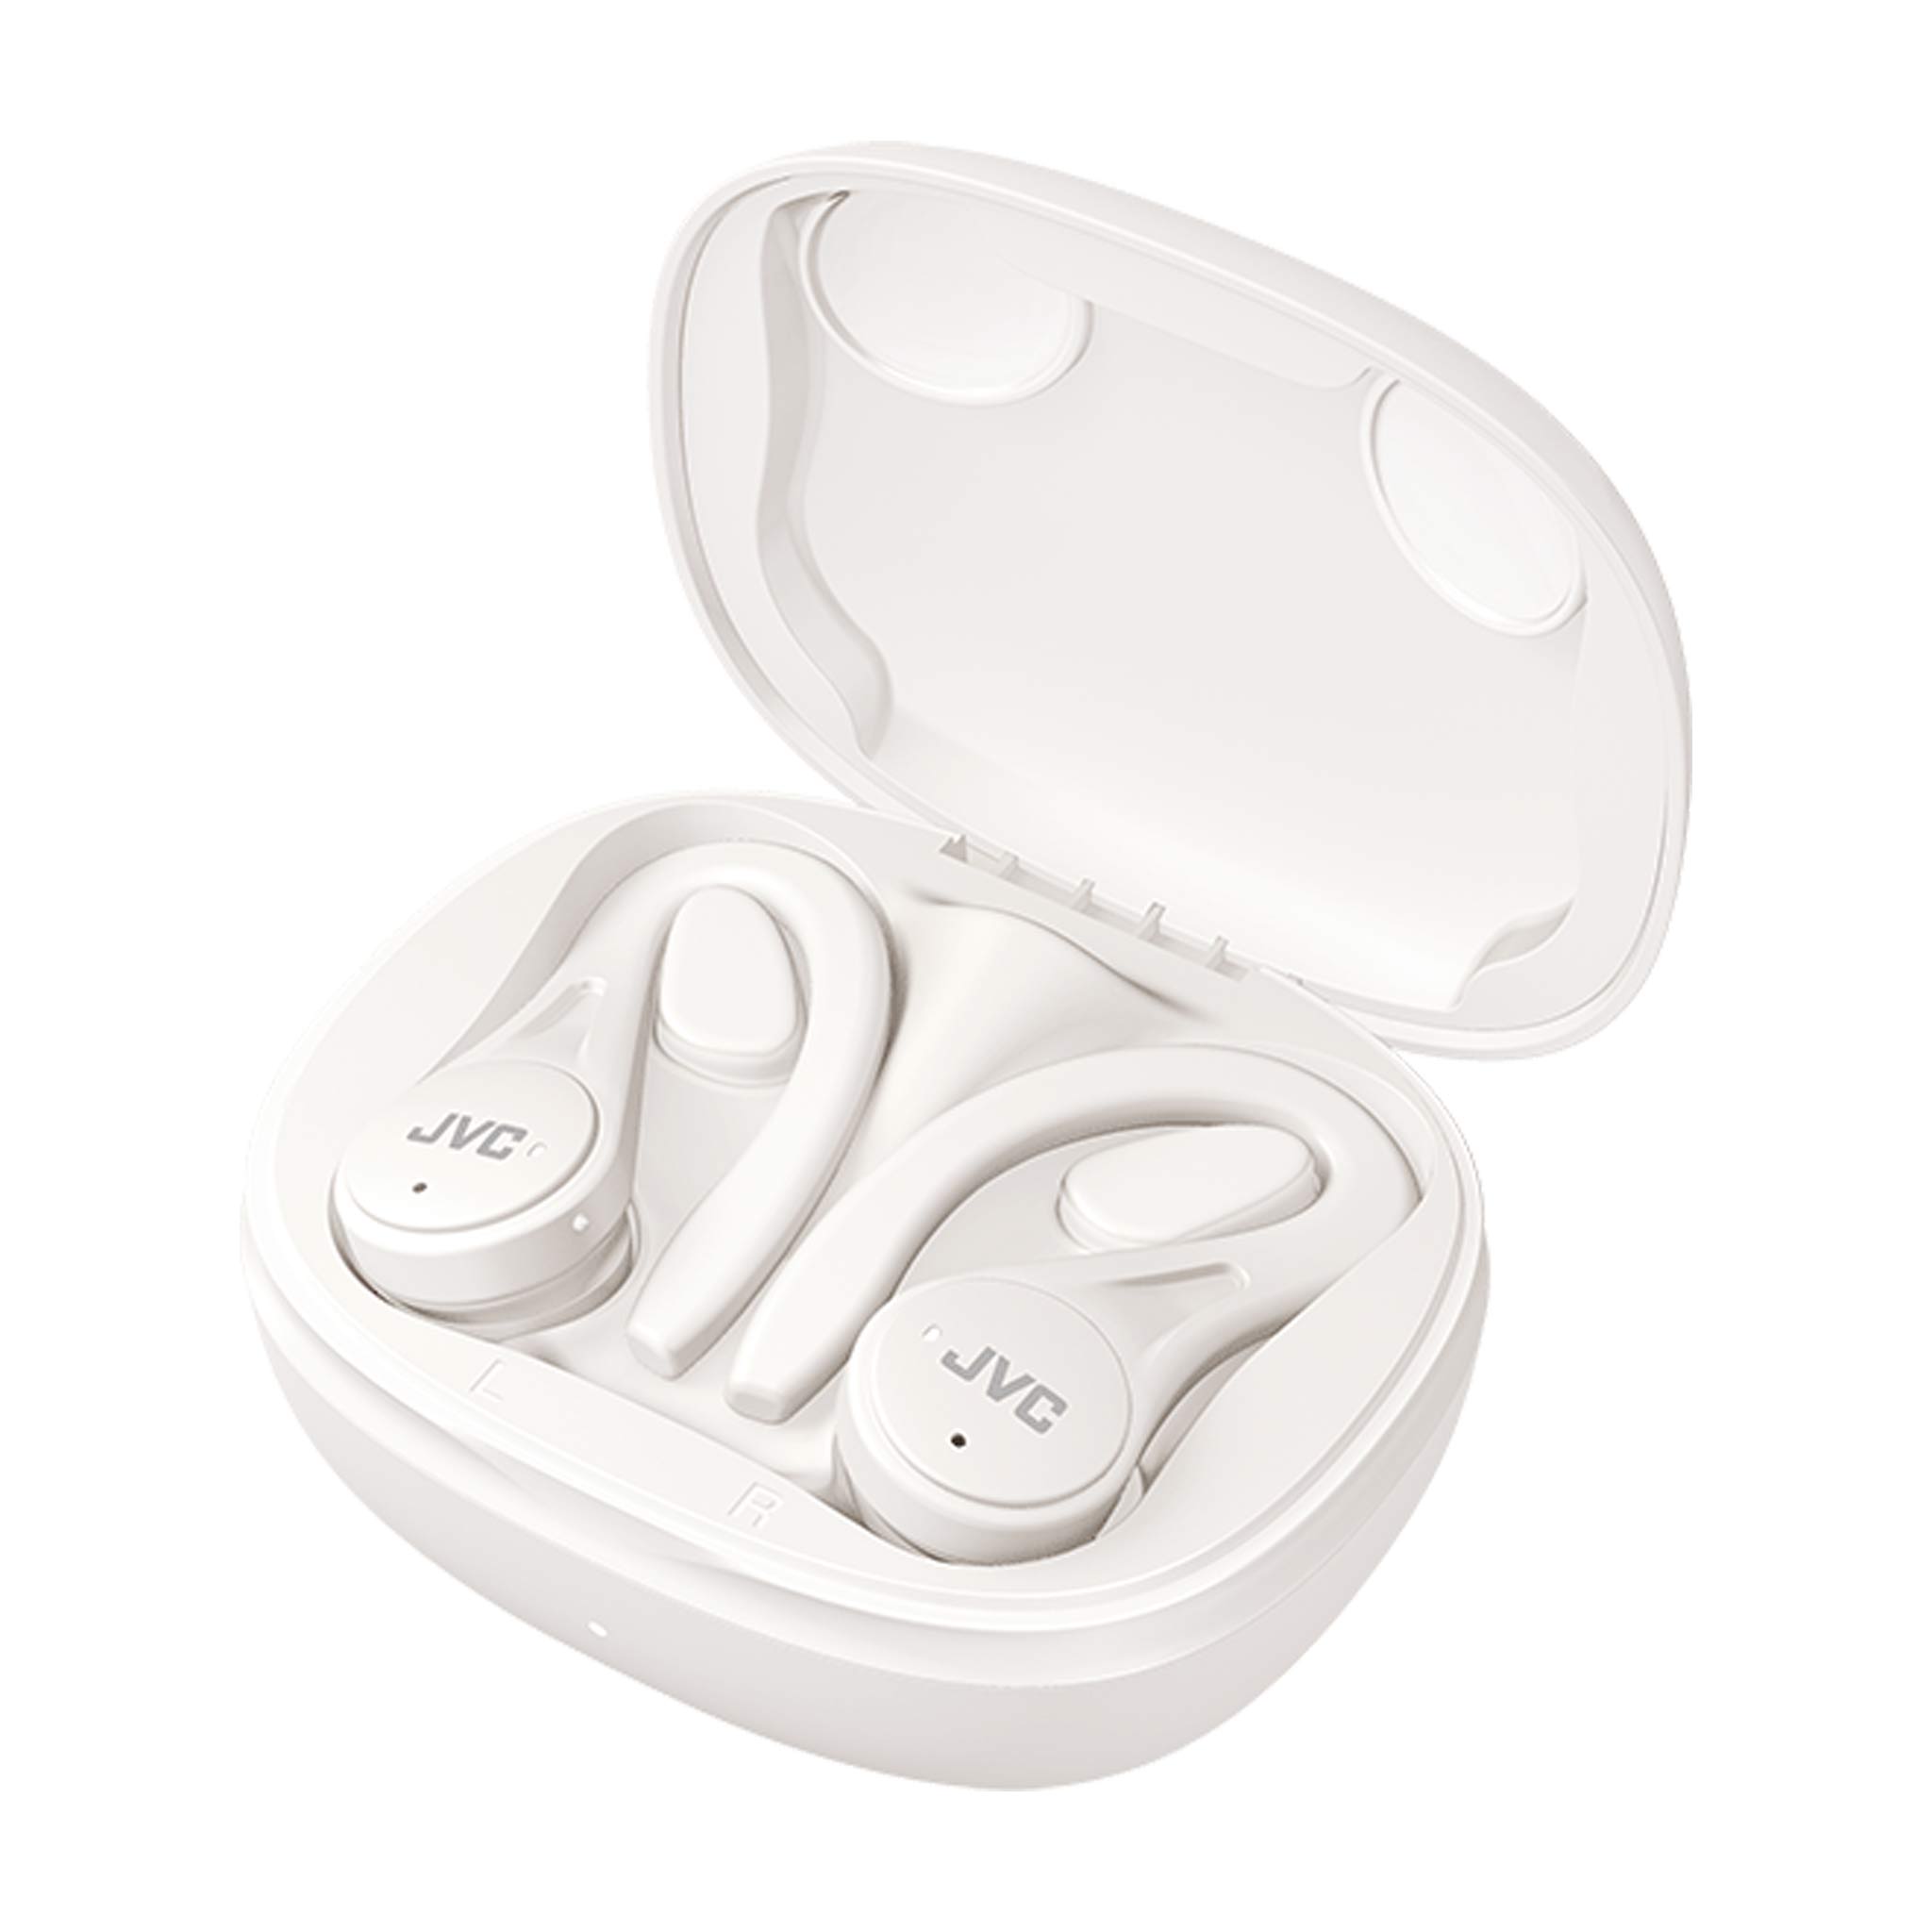 HA-EC25T in white charging case with earbuds in it